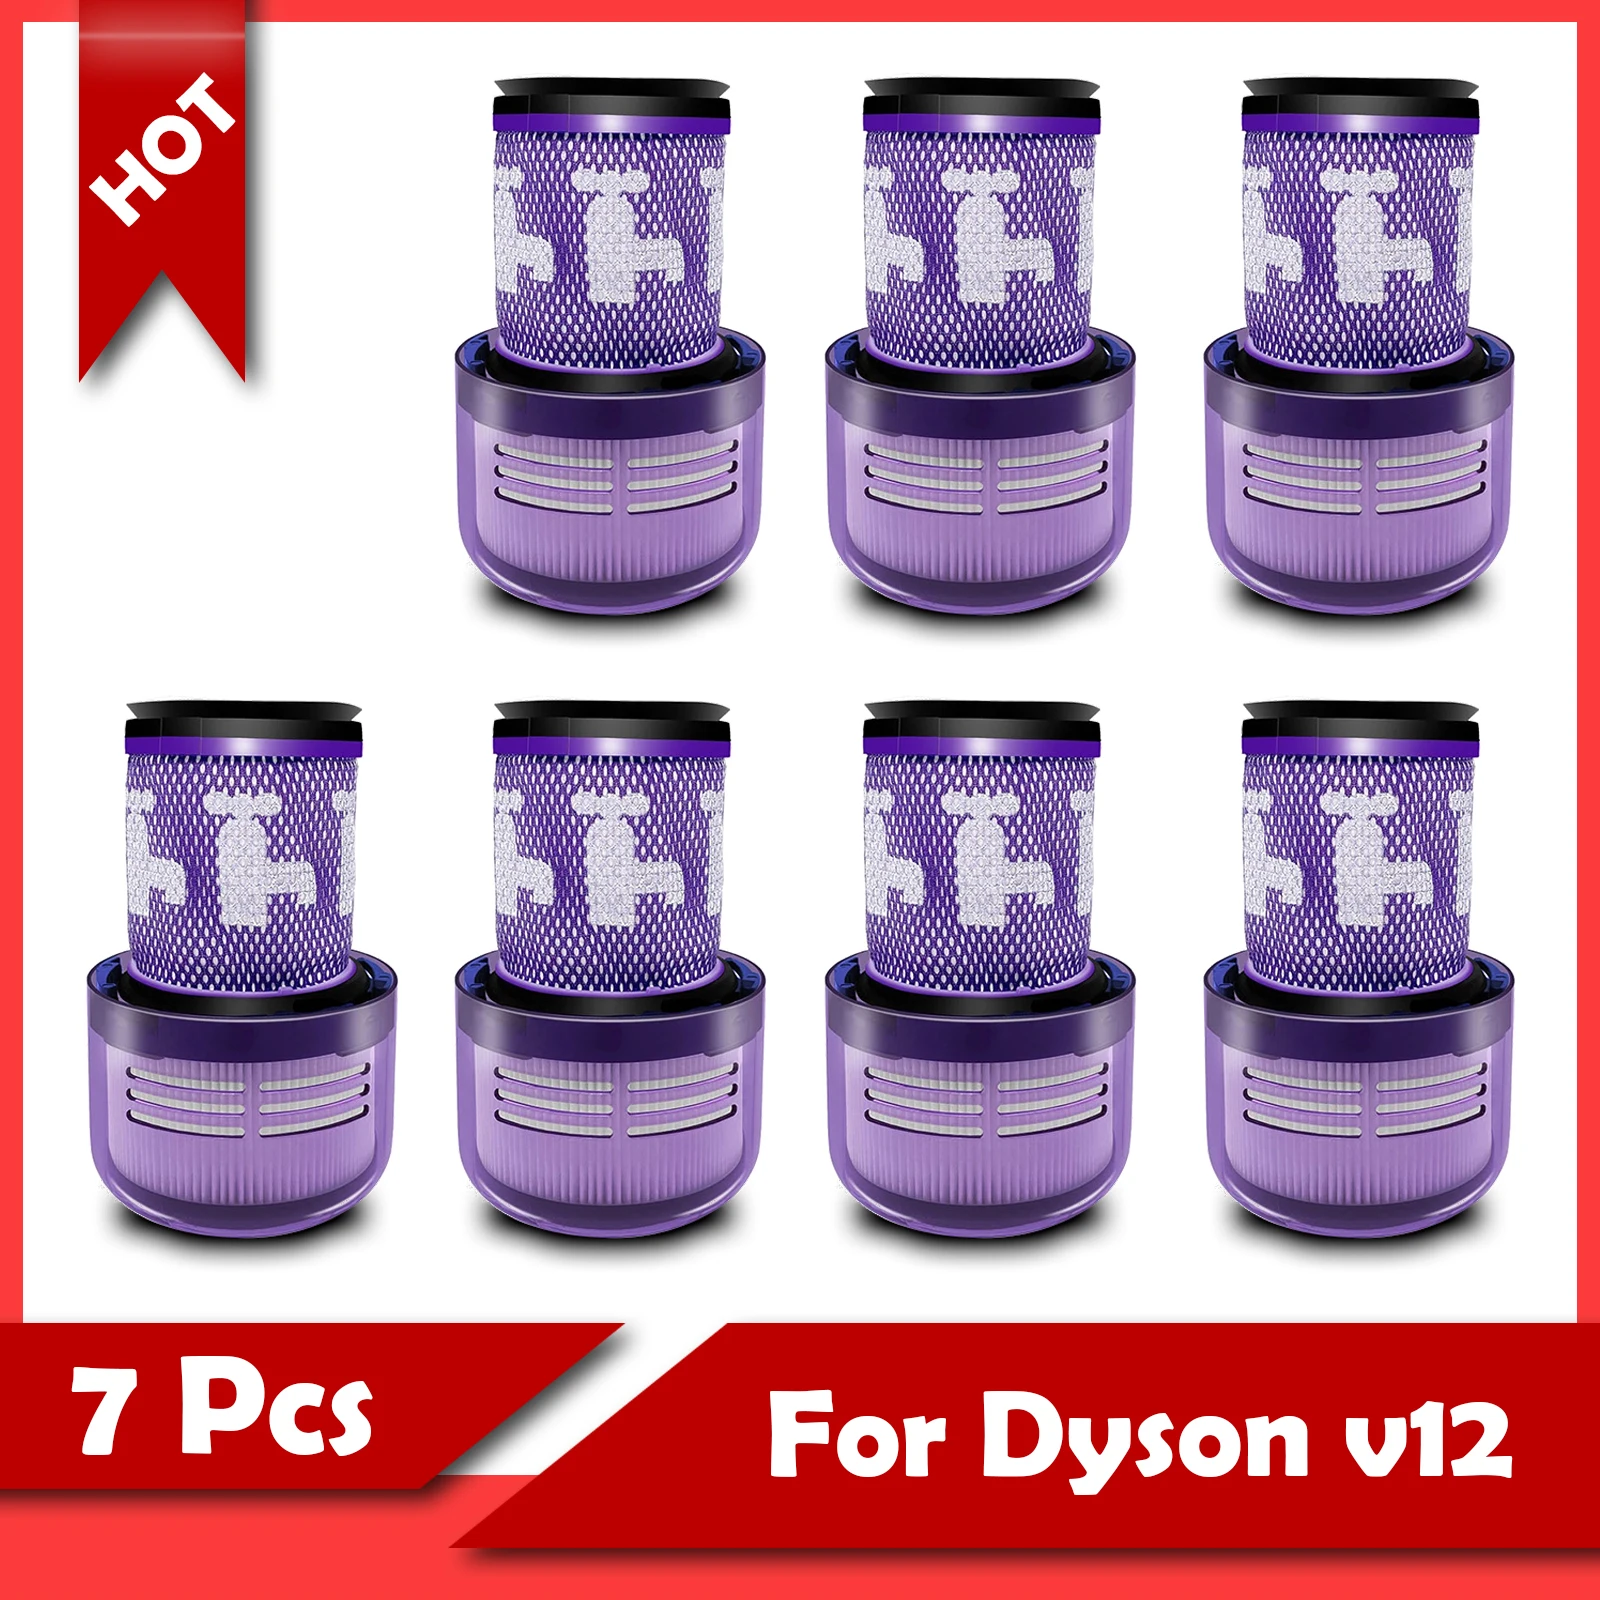 

7 pcs For Dyson V12 HEPA Filter Compatible with Dyson Vacuum Replacement Filters